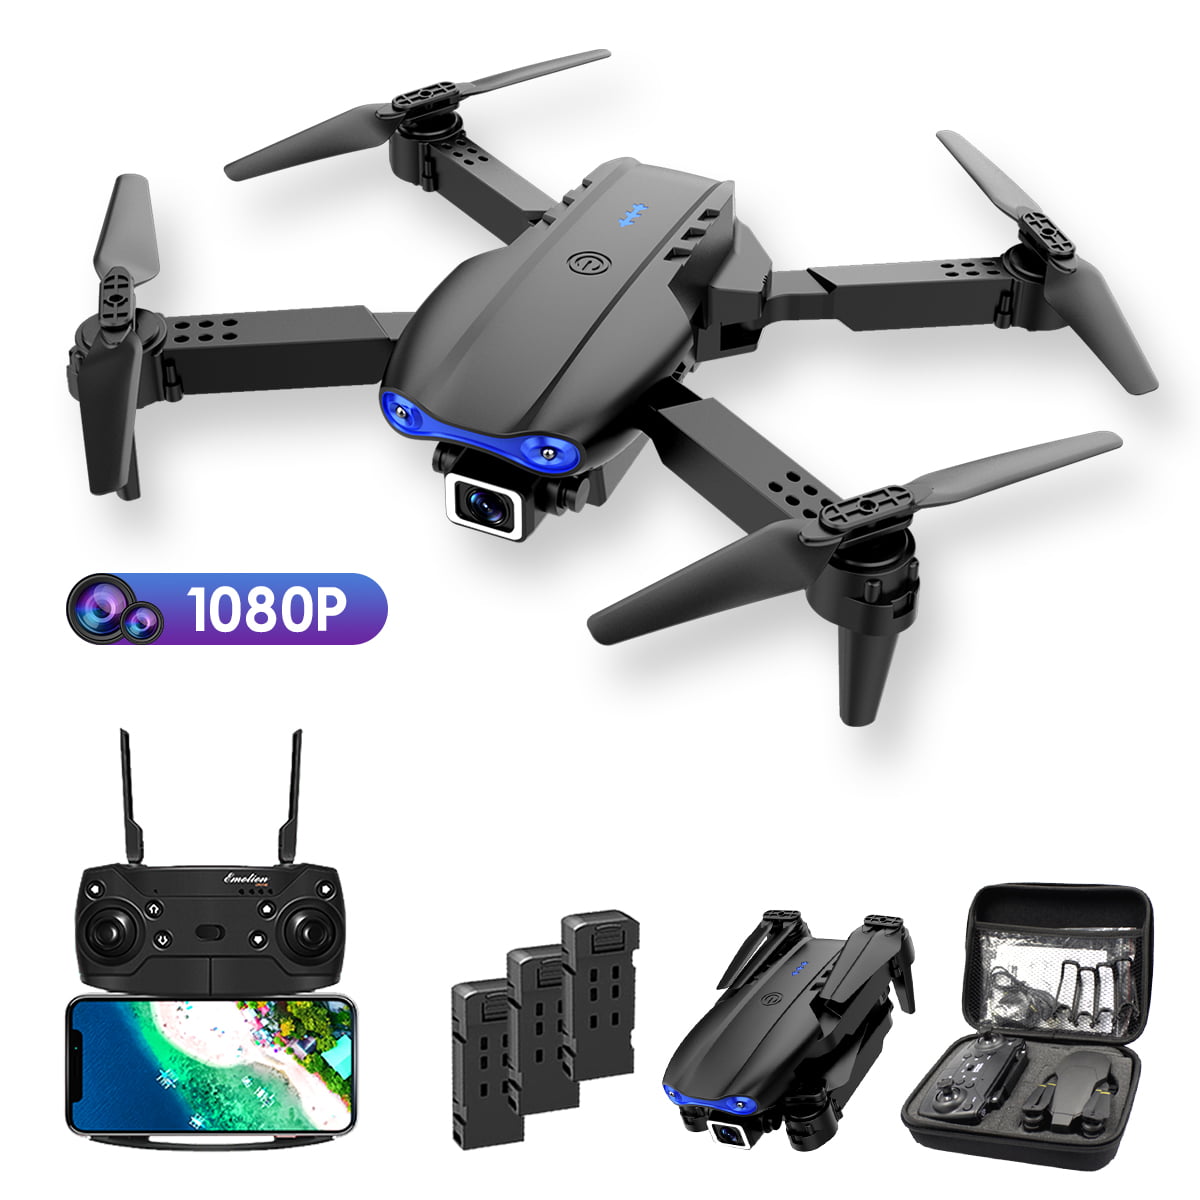 20 mins Battery 5MP 1080P Wide-angle HD Camera Drone Toys Quadcopter KY601S 